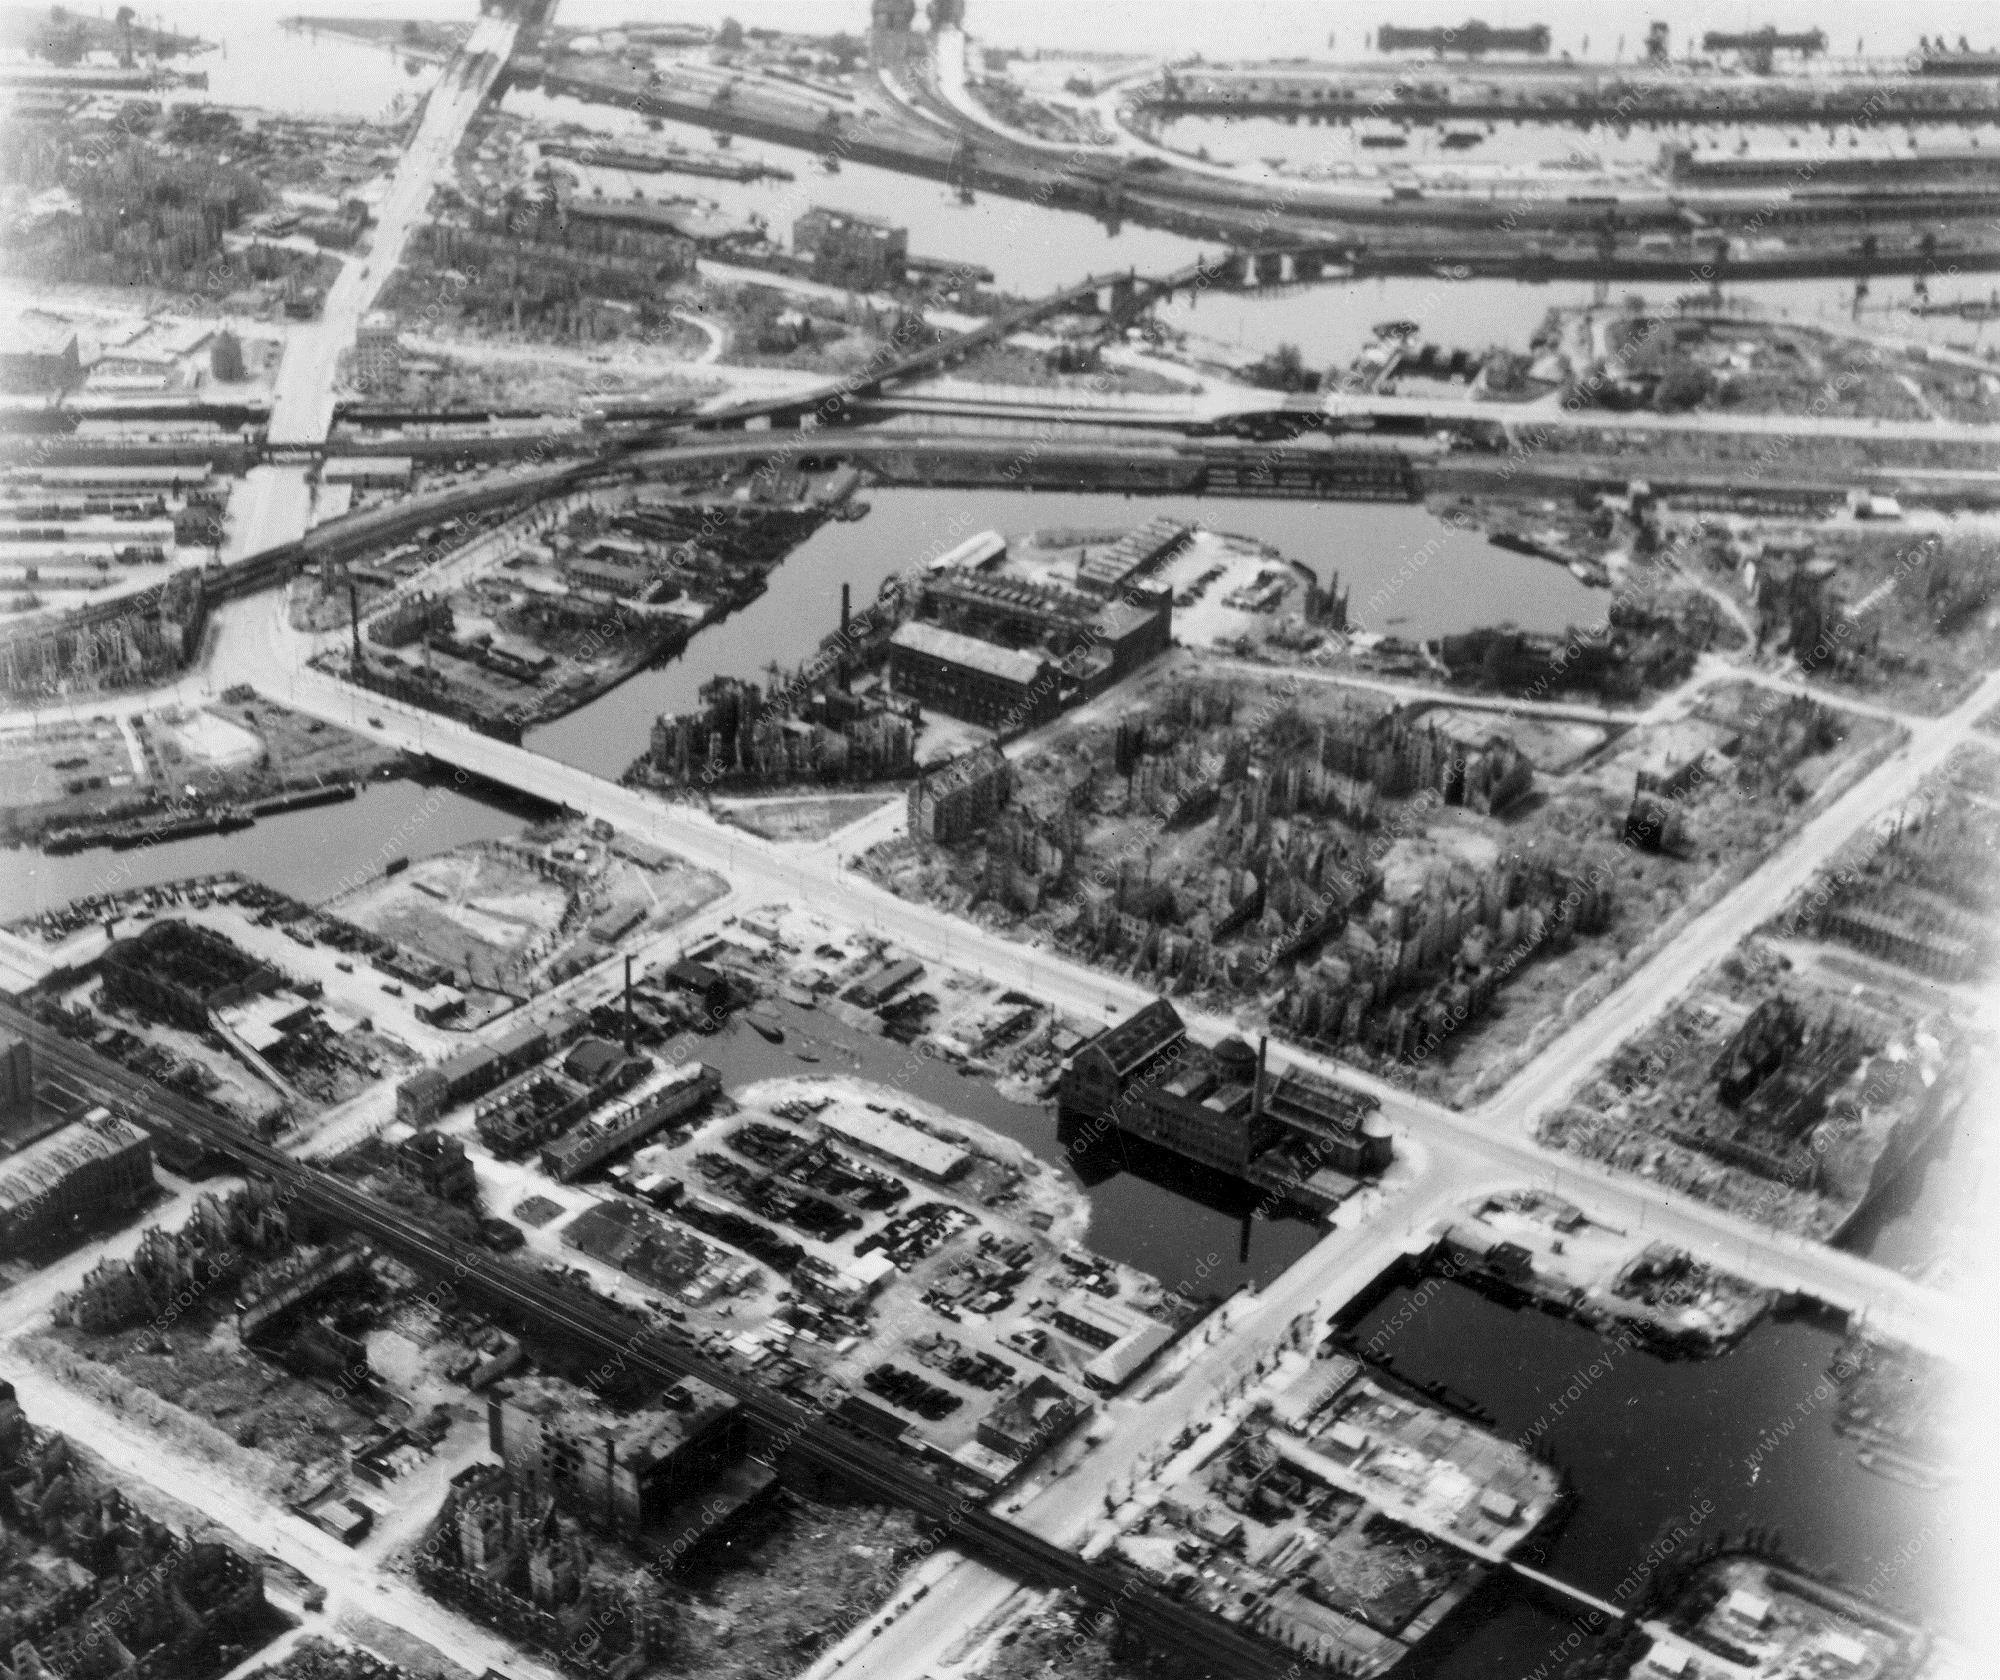 Hamburg from above: Aerial view after Allied air raids in World War II